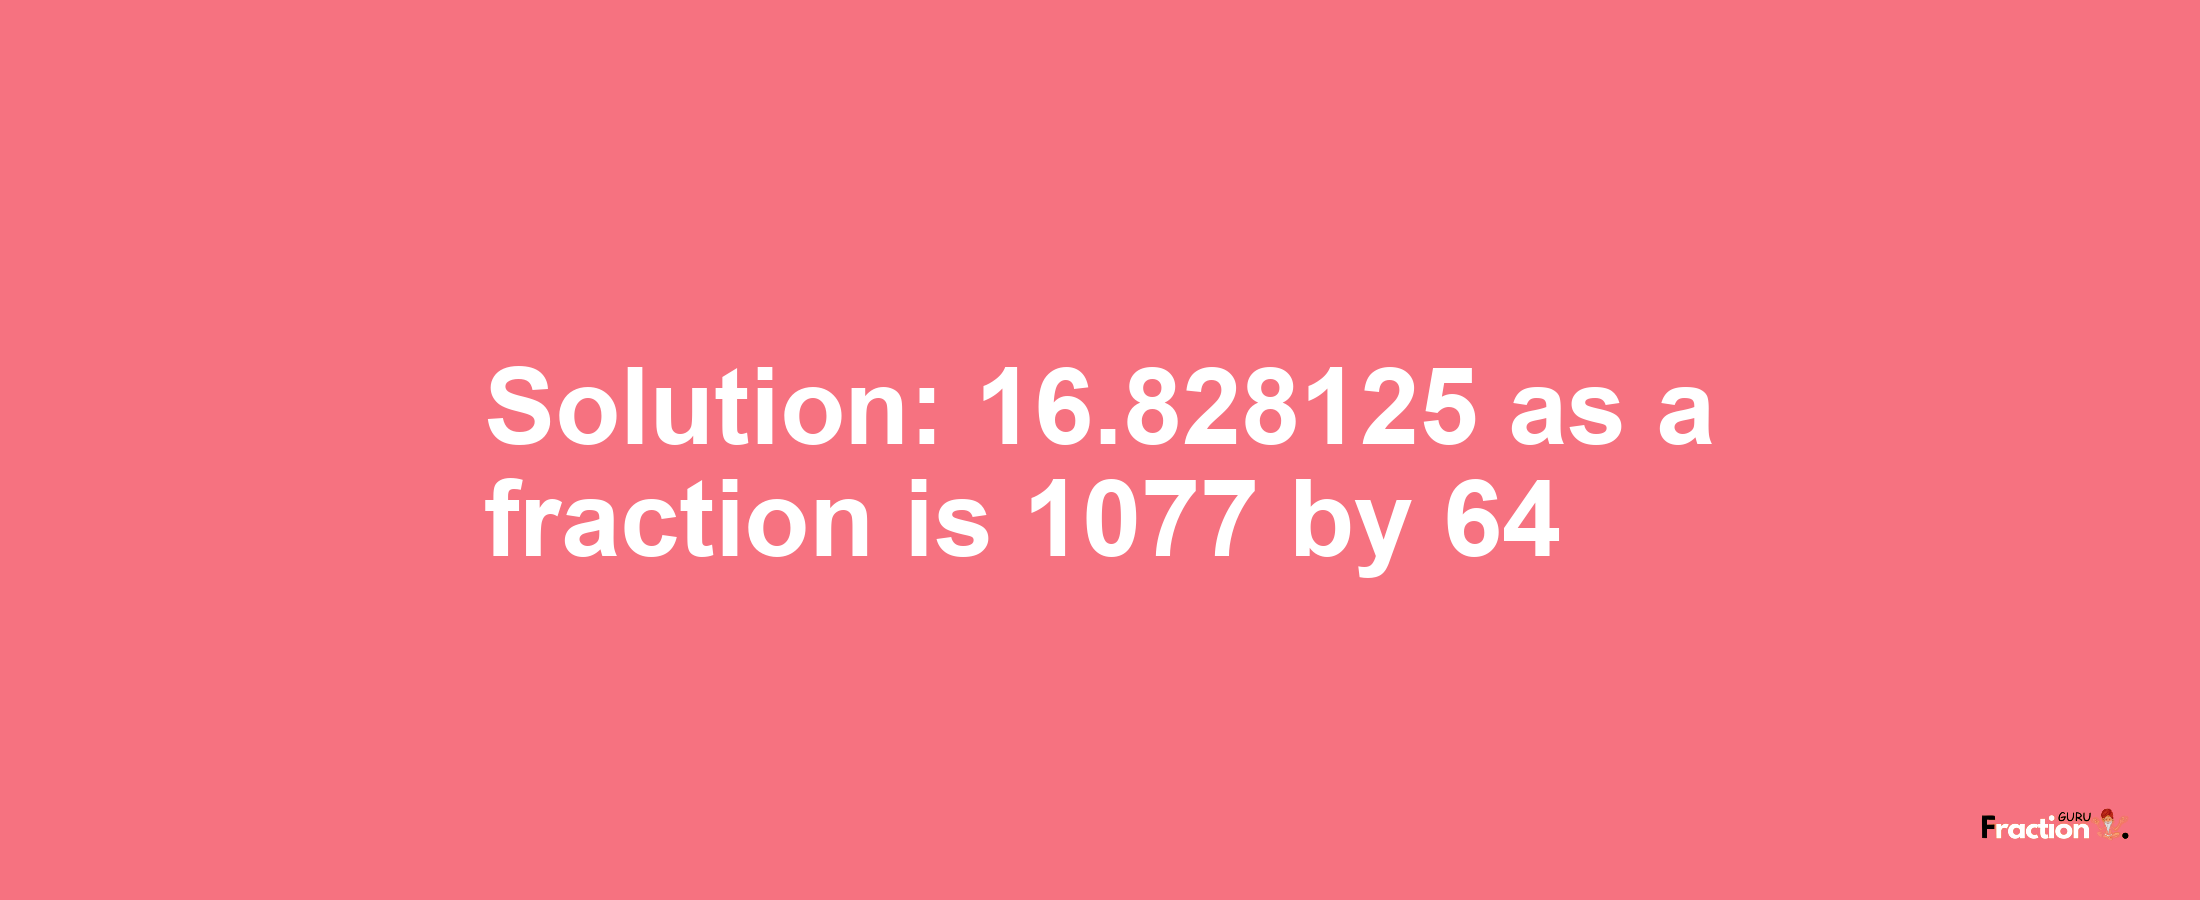 Solution:16.828125 as a fraction is 1077/64